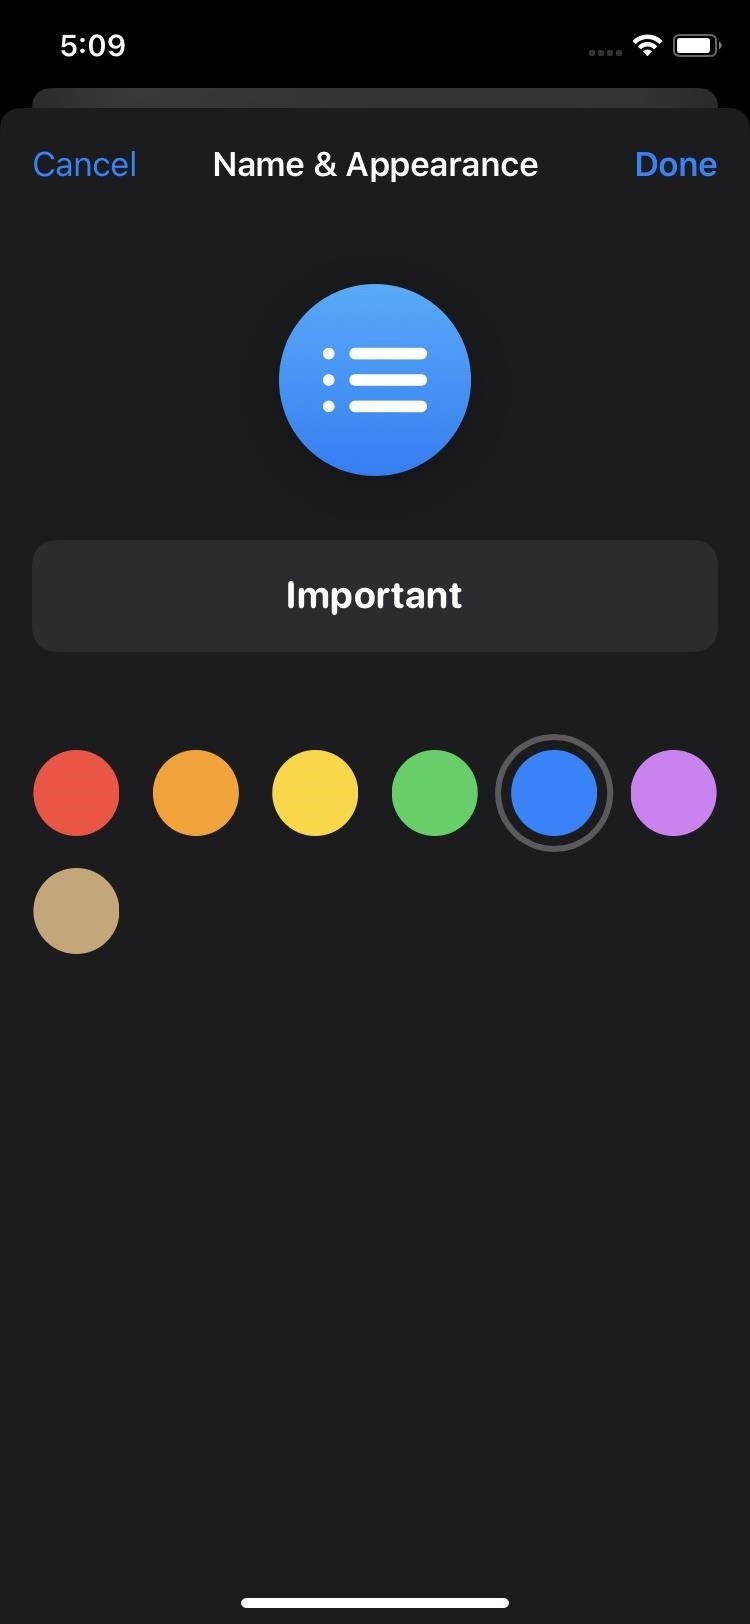 How to Change List Colors & Icons in iOS 13's Reminders App for a More Customized Look